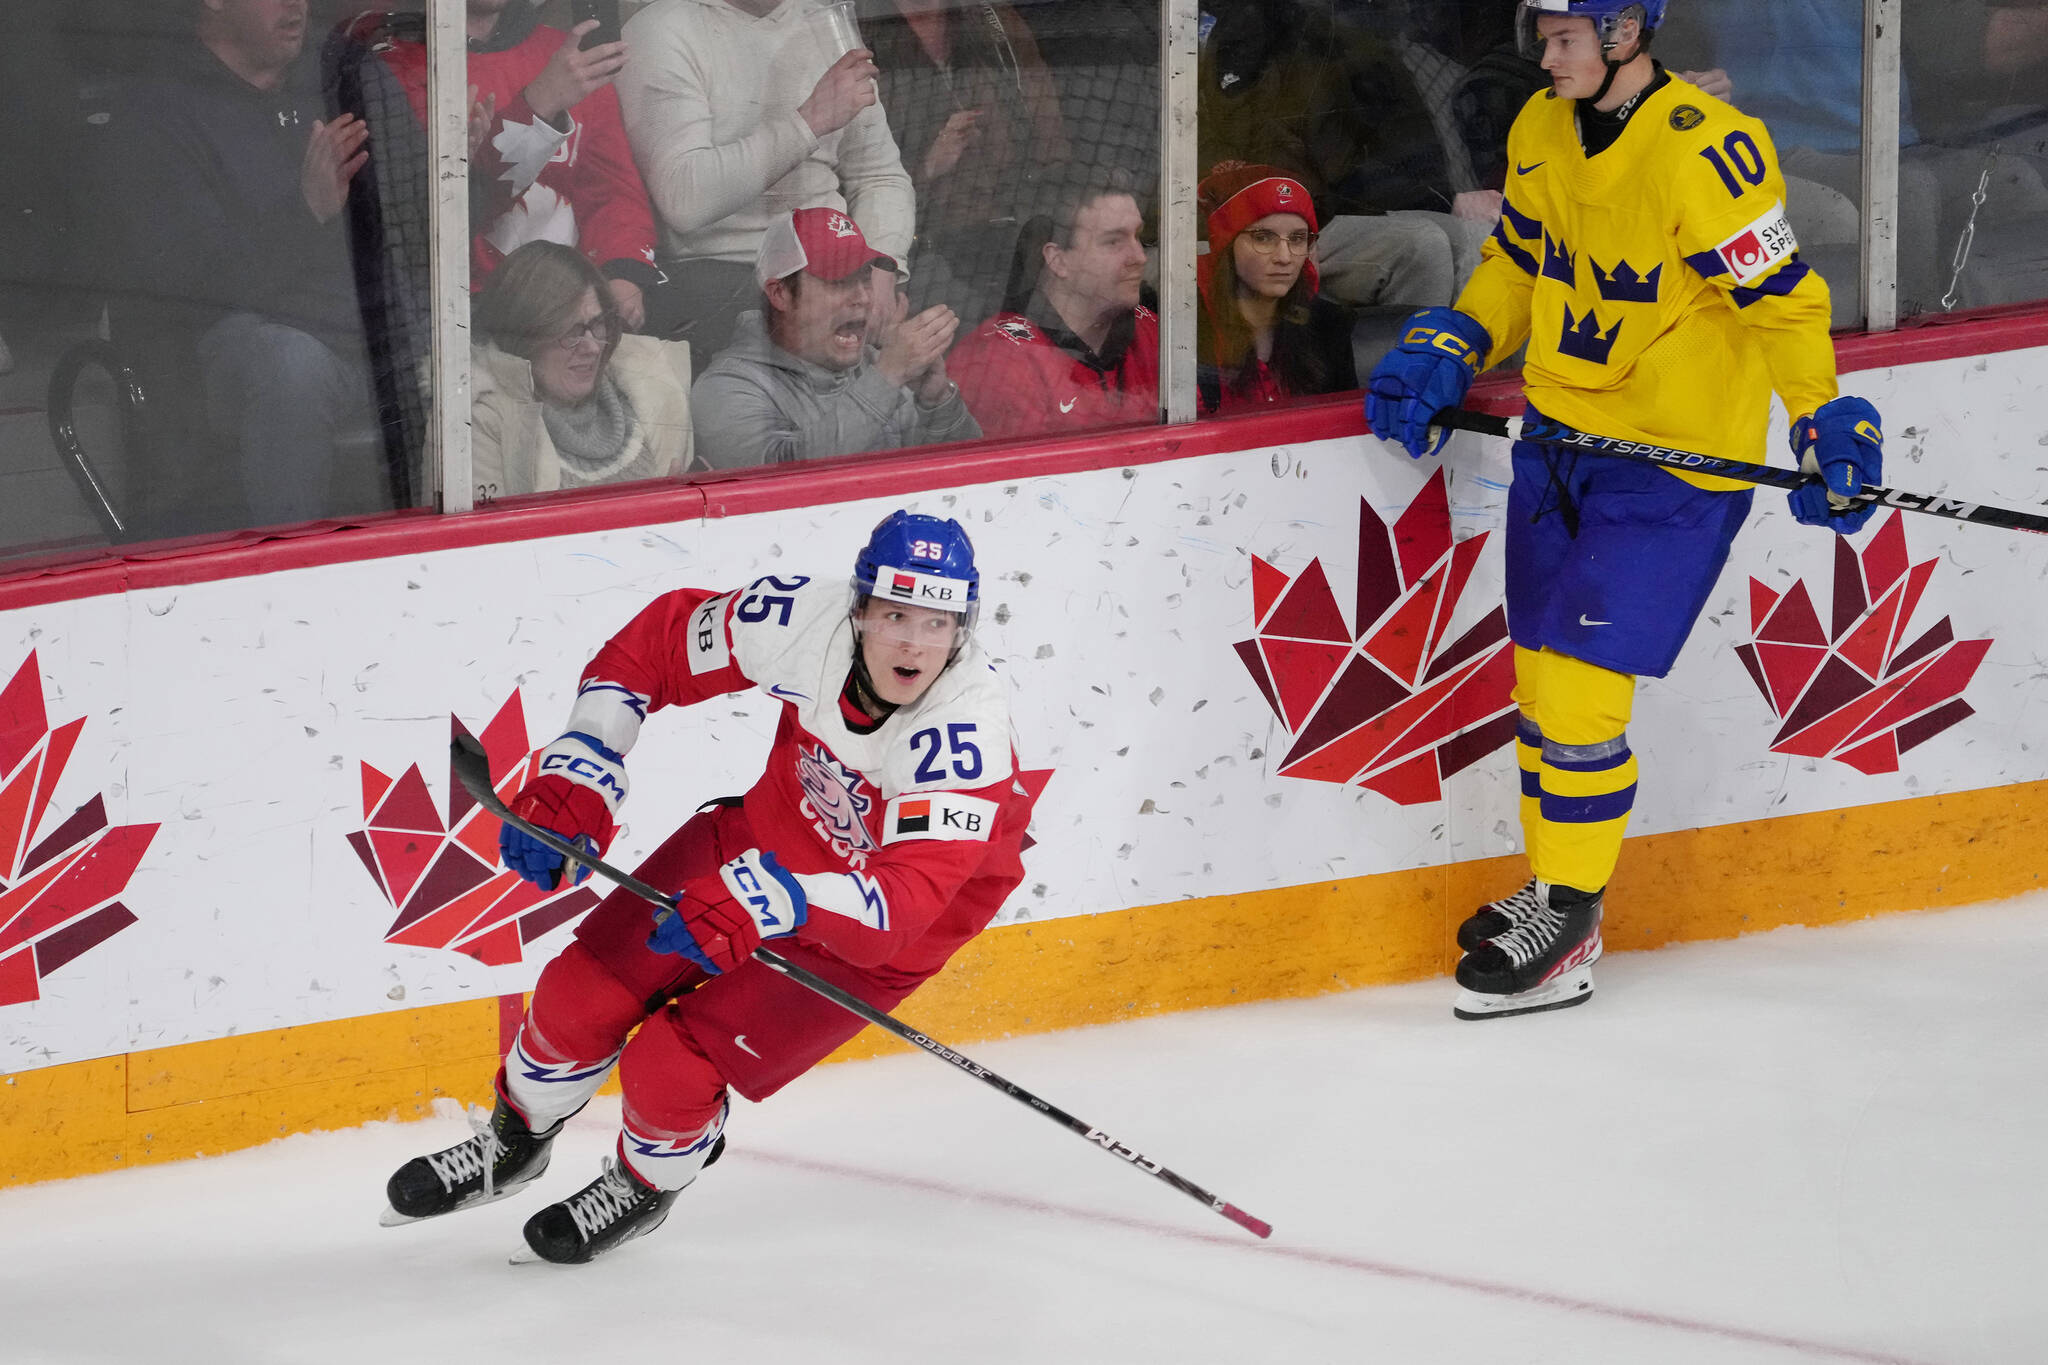 Jiri Kulich of Czechia, left, celebrates his game-winning goal in front of Fabian Wagner of Sweden during overtime of IIHF World Junior Hockey Championship semifinal action in Halifax on Wednesday, January 4, 2023. THE CANADIAN PRESS/Darren Calabrese